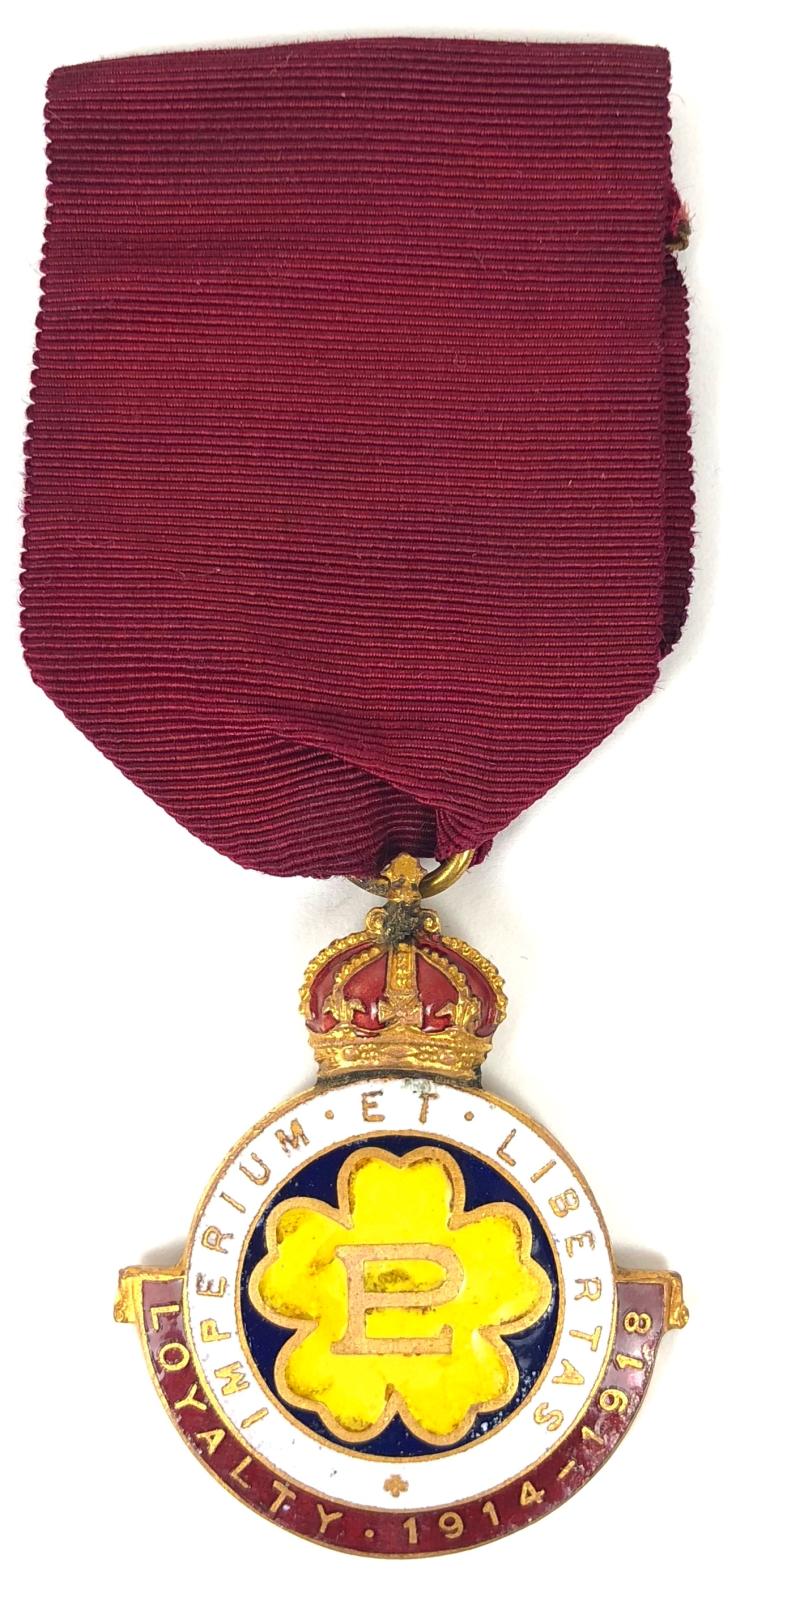 Primrose League Empire and Liberty Loyalty 1914 -1918 Medal